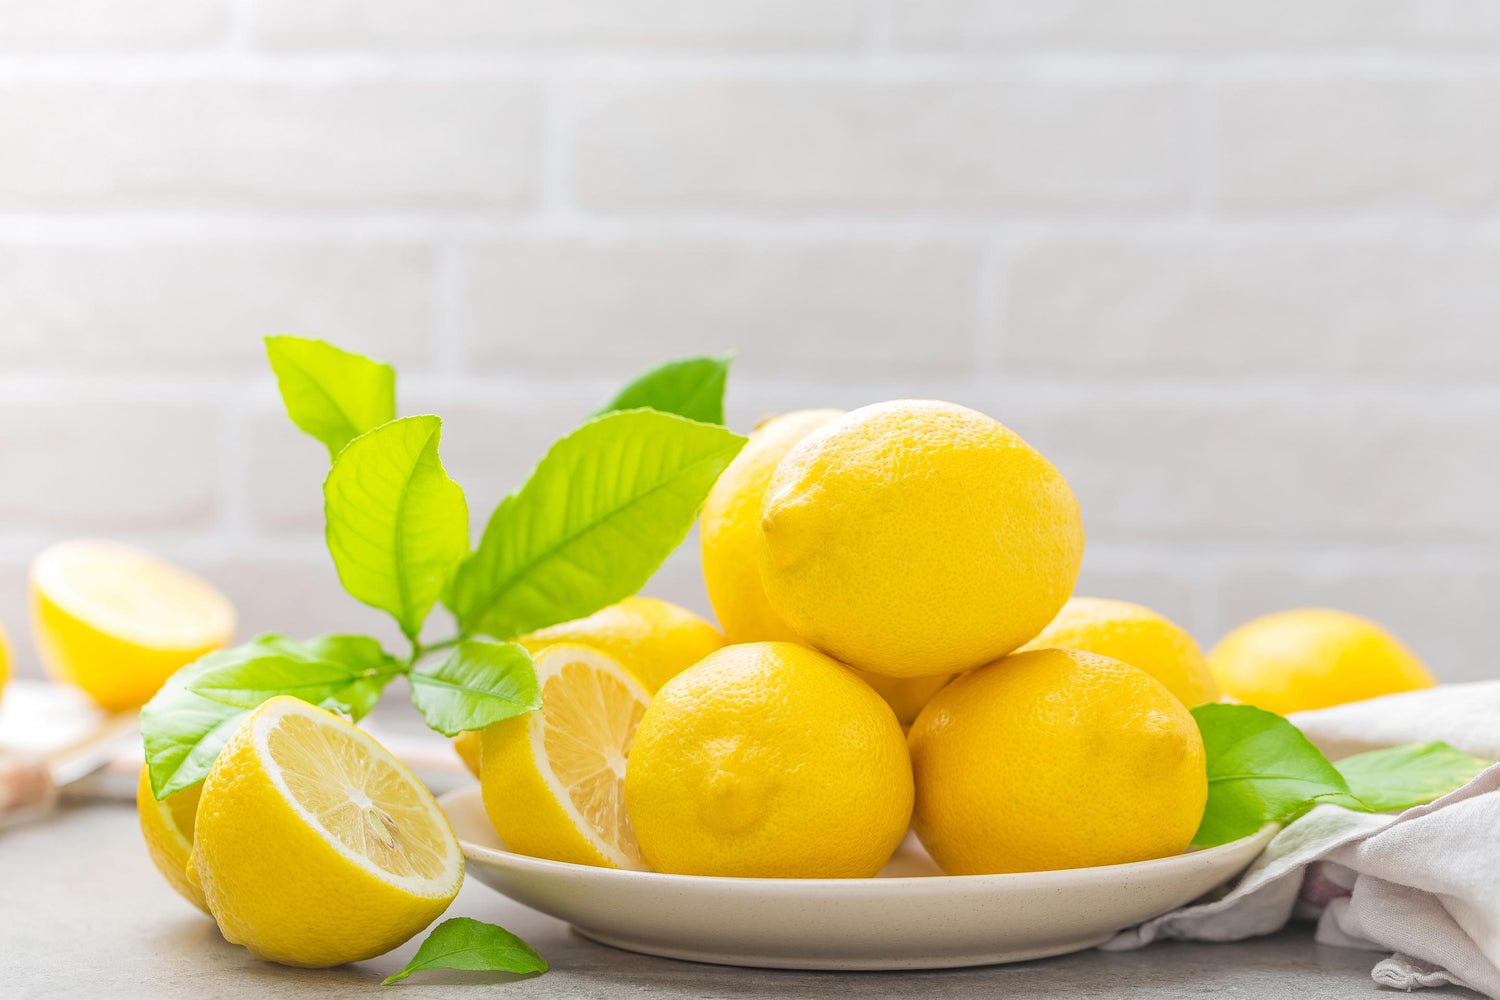 Why is Lemon Important to your Diet?